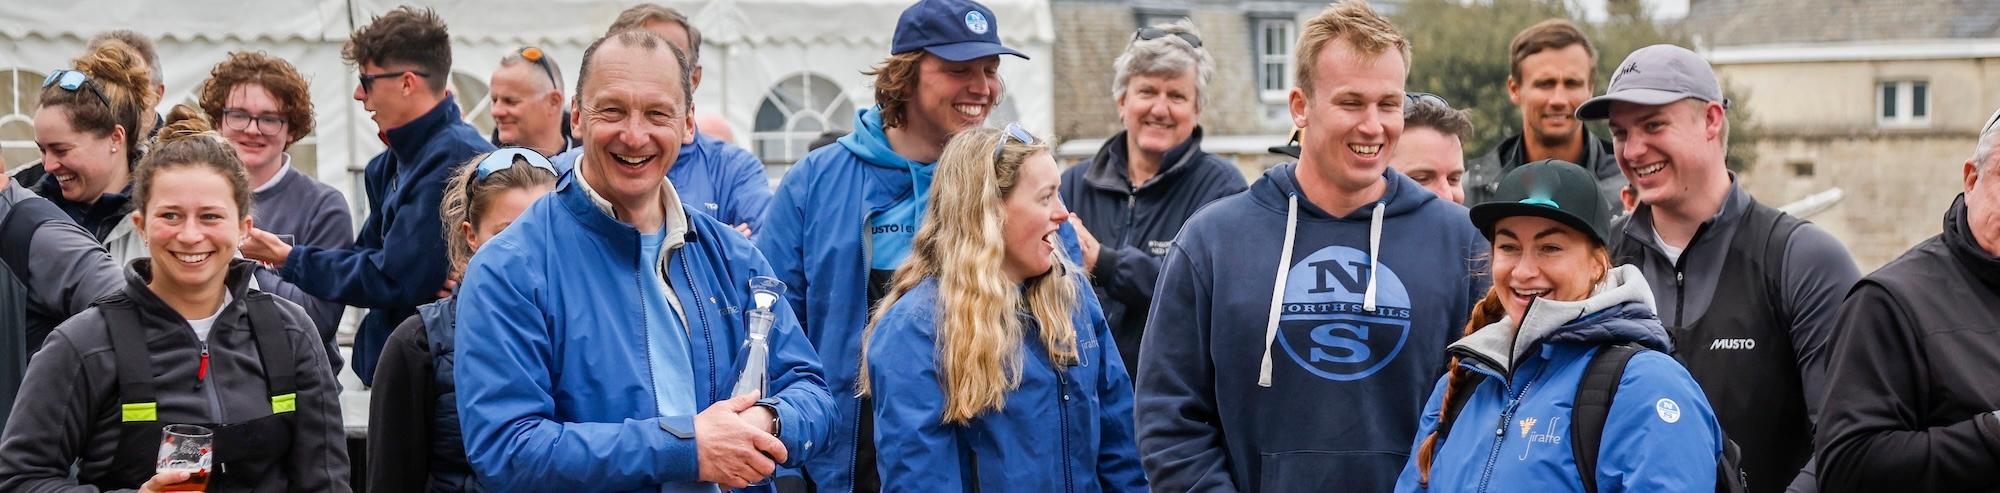 RORC Crew Match will be returning to the London Club. This is a great opportunity for skippers and boat owners to meet crew ahead of the sailing season and vice versa. 7th March 2024

